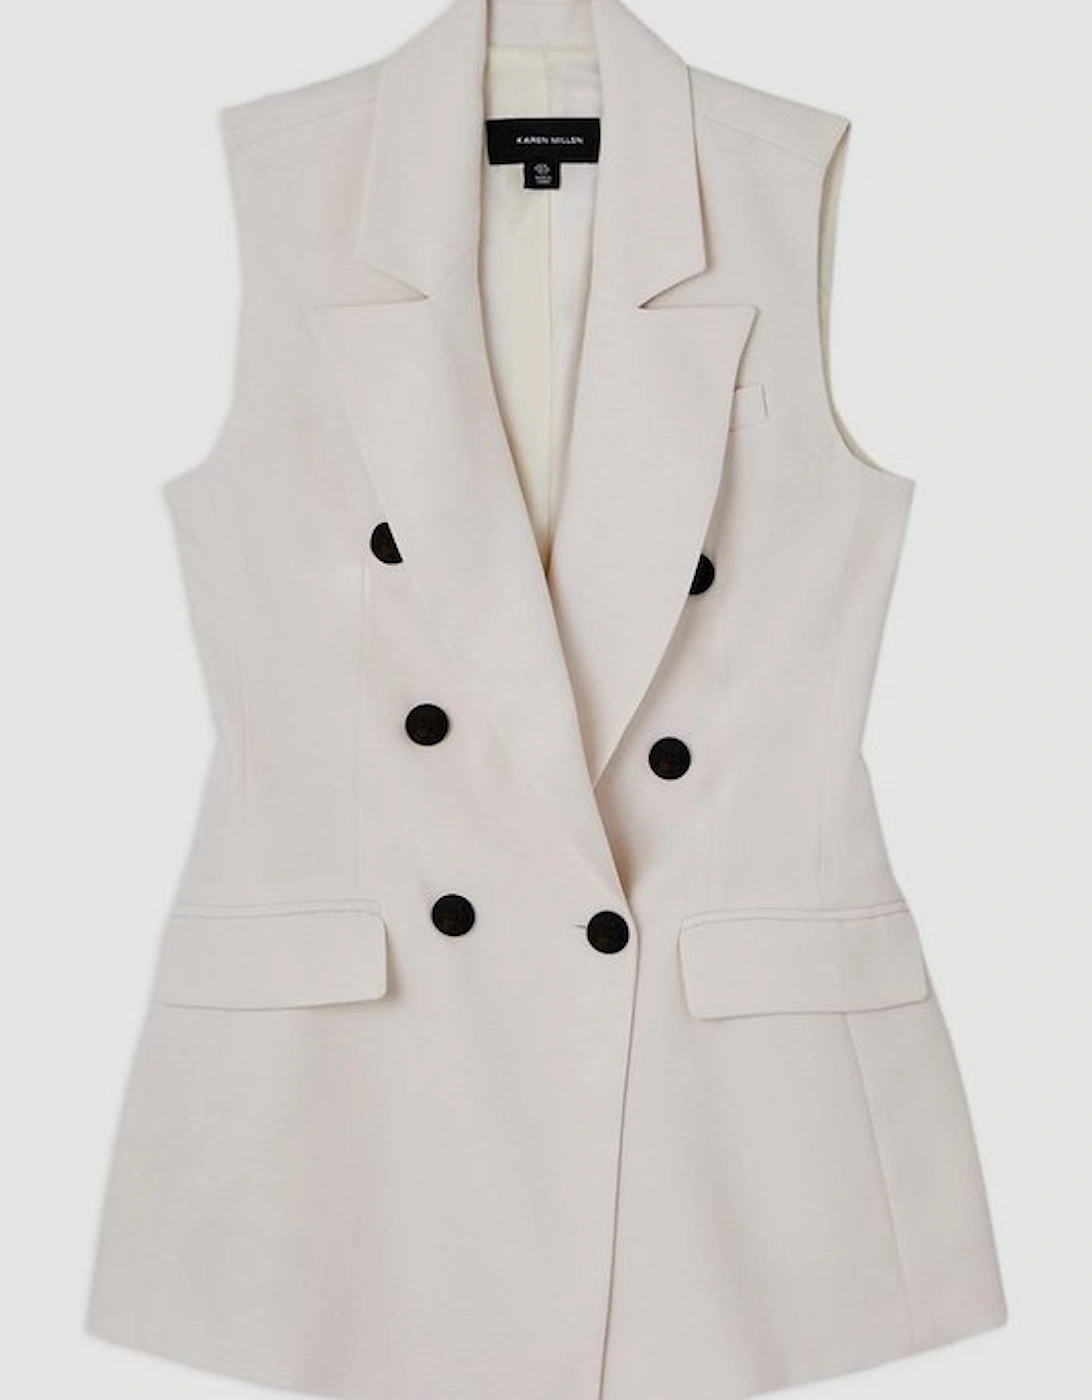 Soft Tailored Double Breasted Sleeveless Tailored Blazer